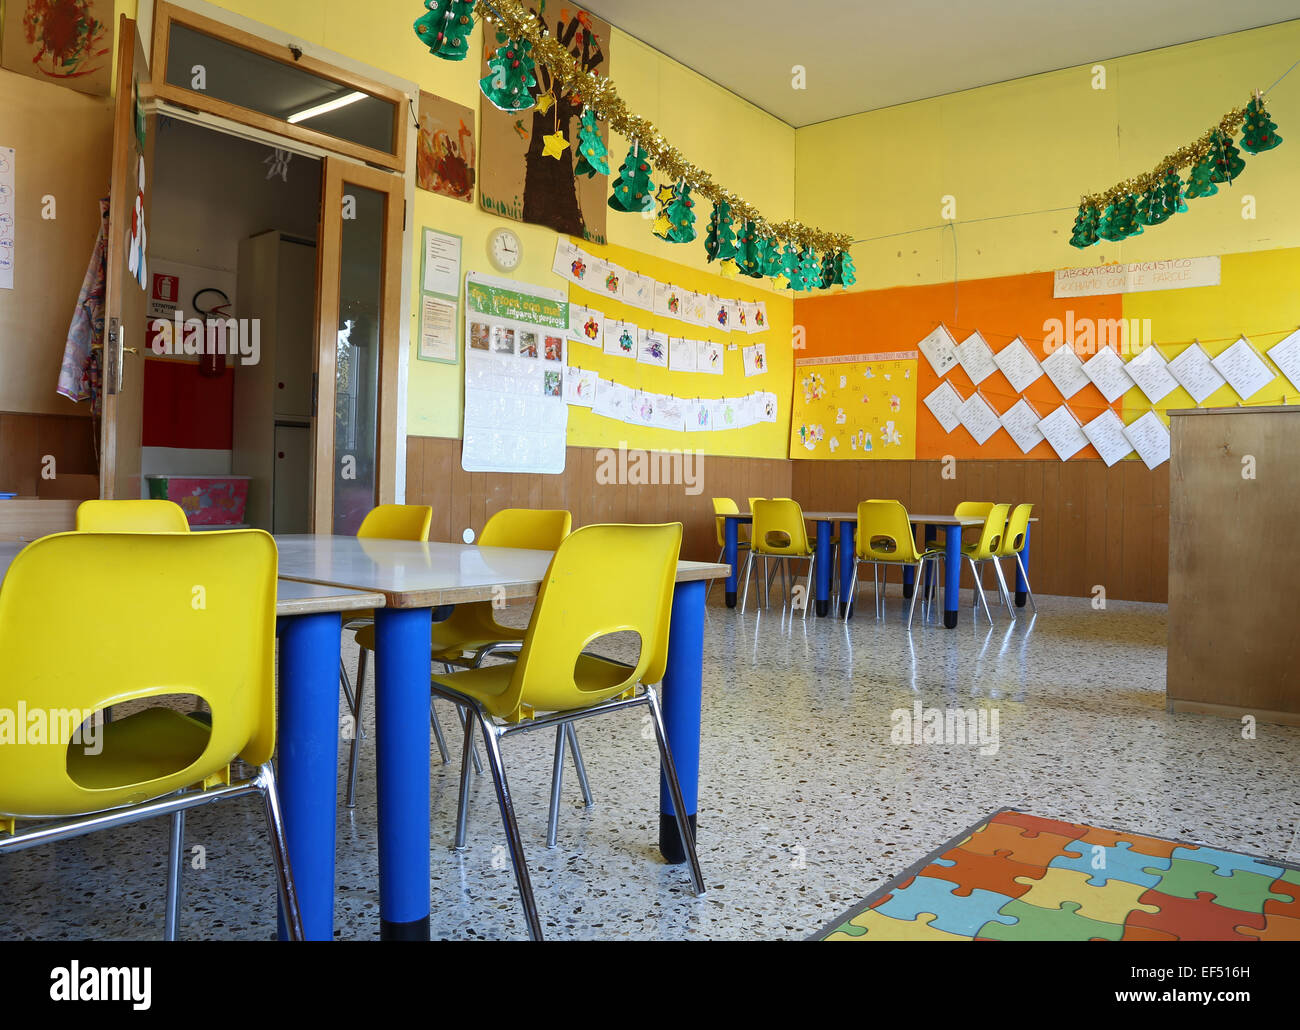 Kindergarten Classroom With Yellow Chairs And Table With